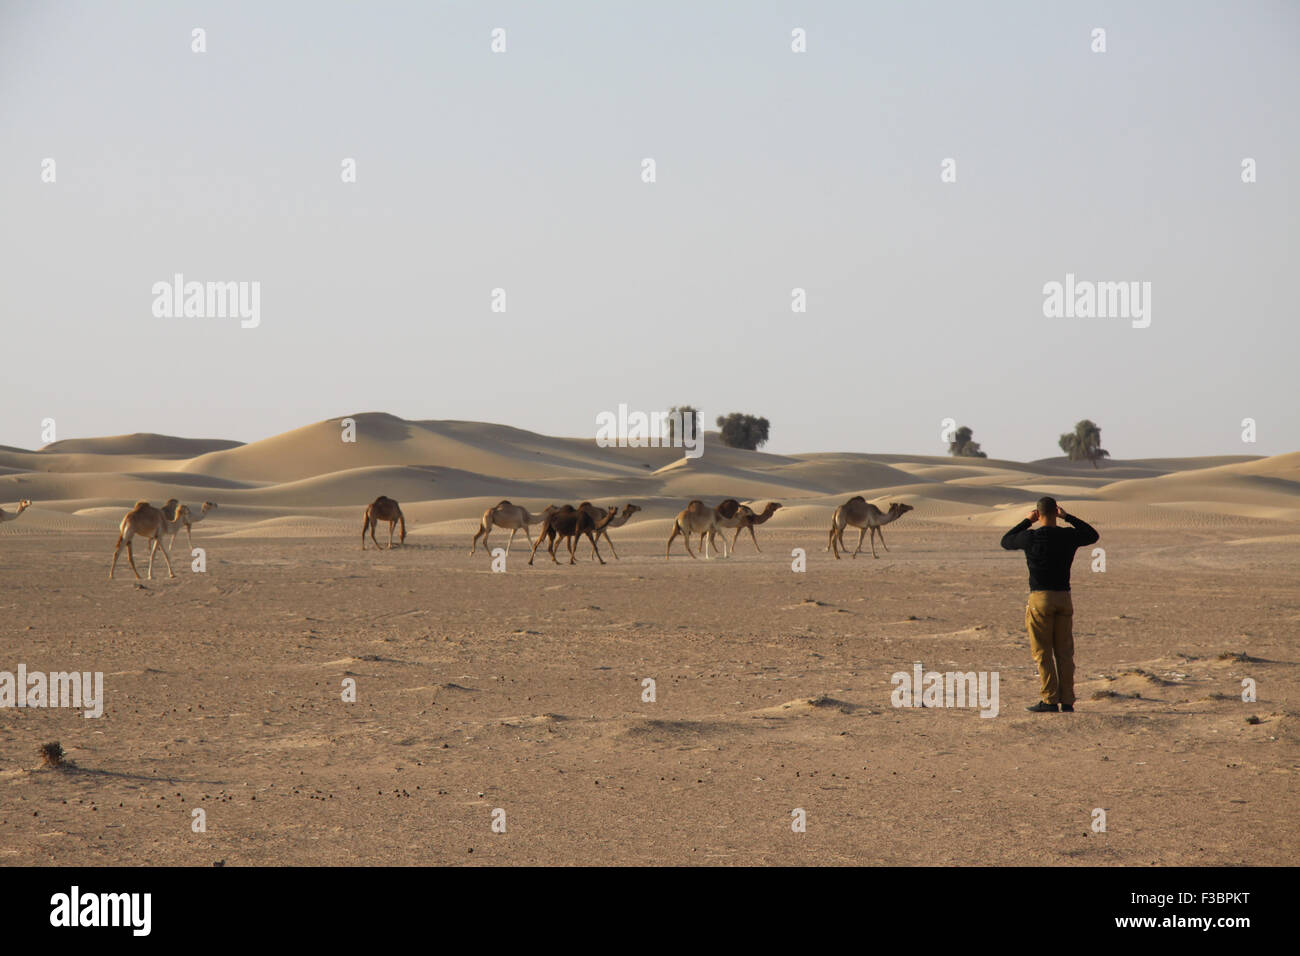 Man taking a photo of camels in the Arabian Desert. Stock Photo